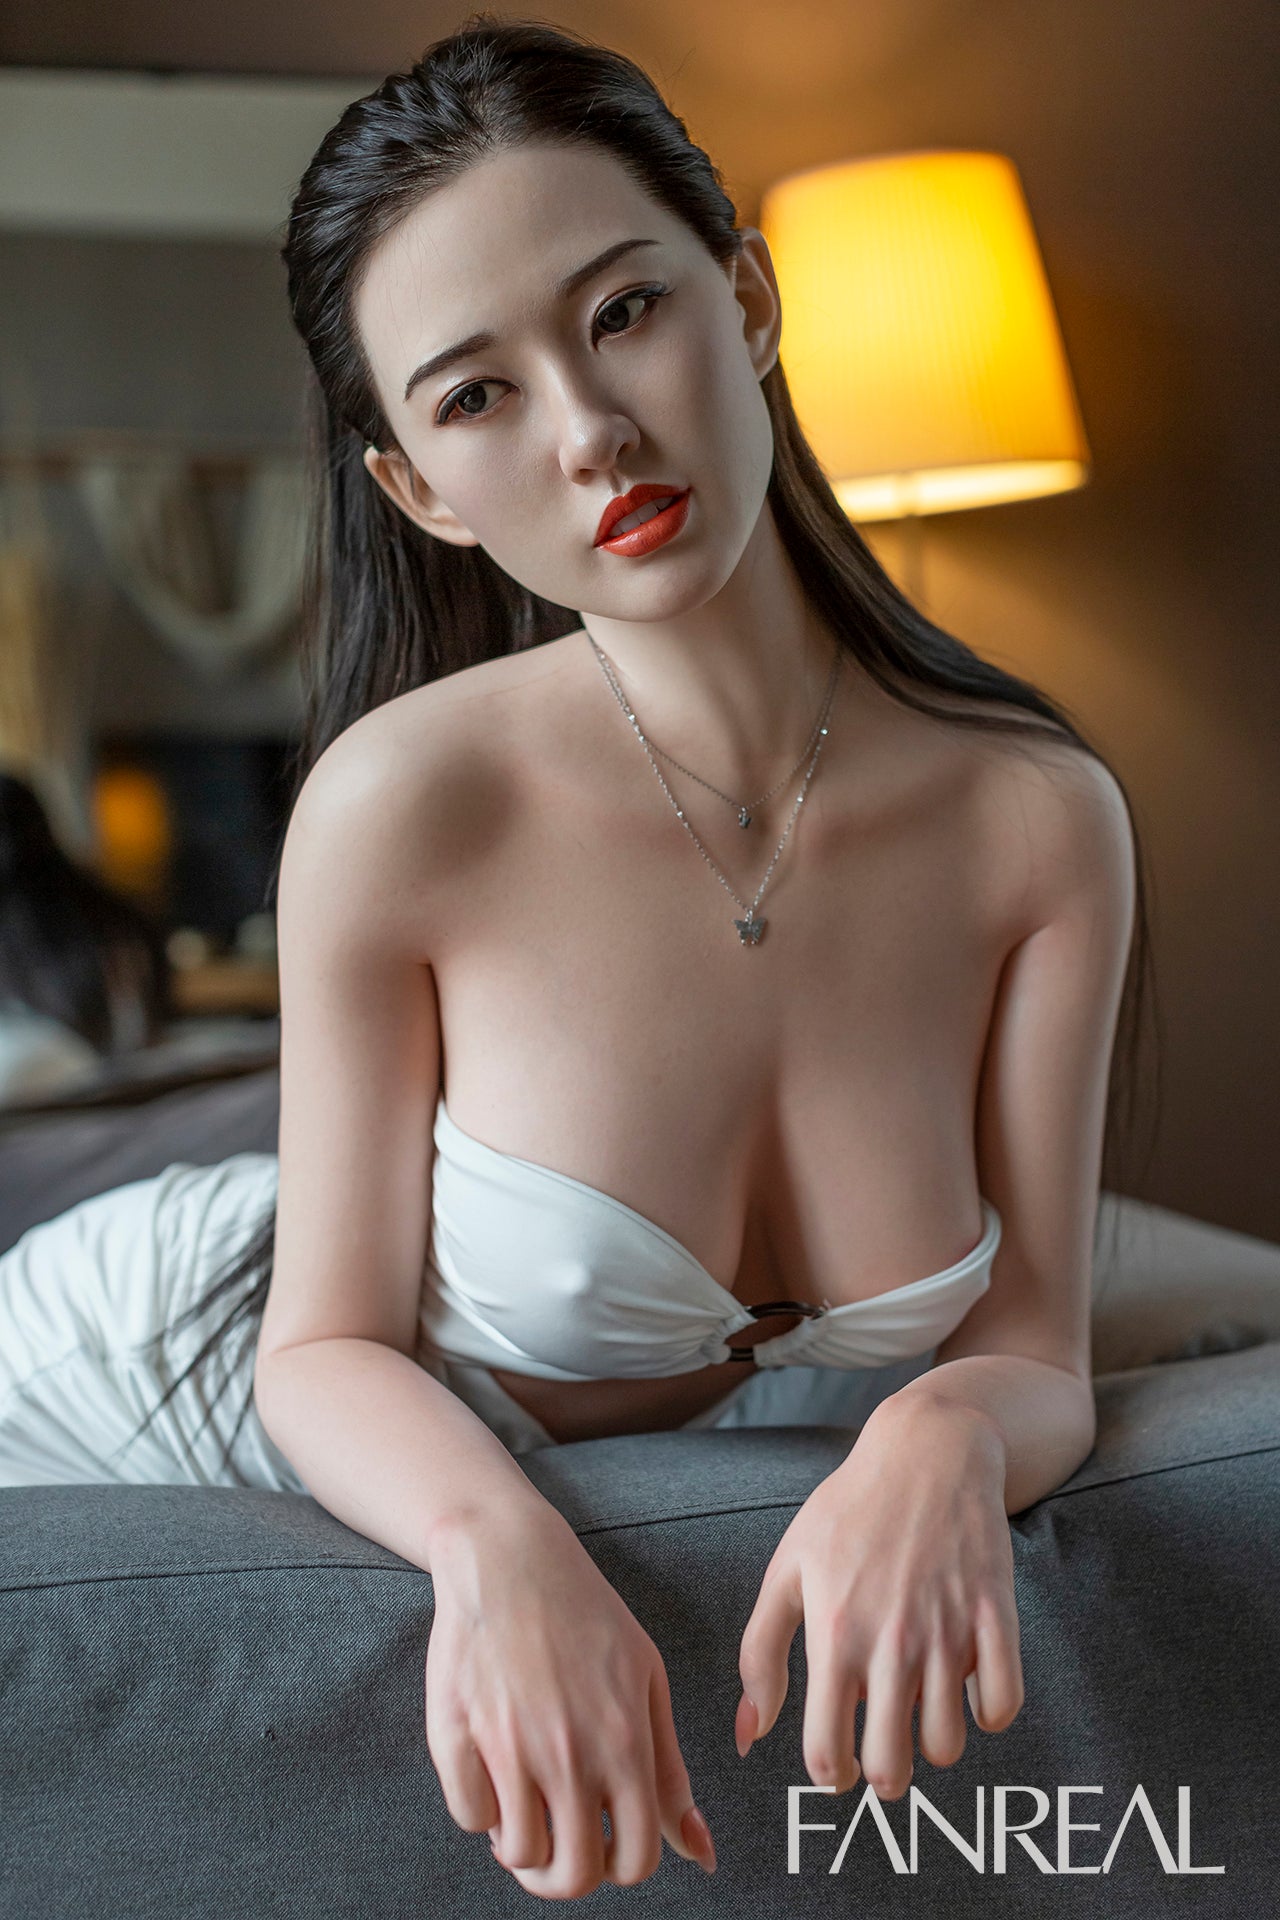 FANREAL DOLL 173 CM D Silicone - Fei | Buy Sex Dolls at DOLLS ACTUALLY